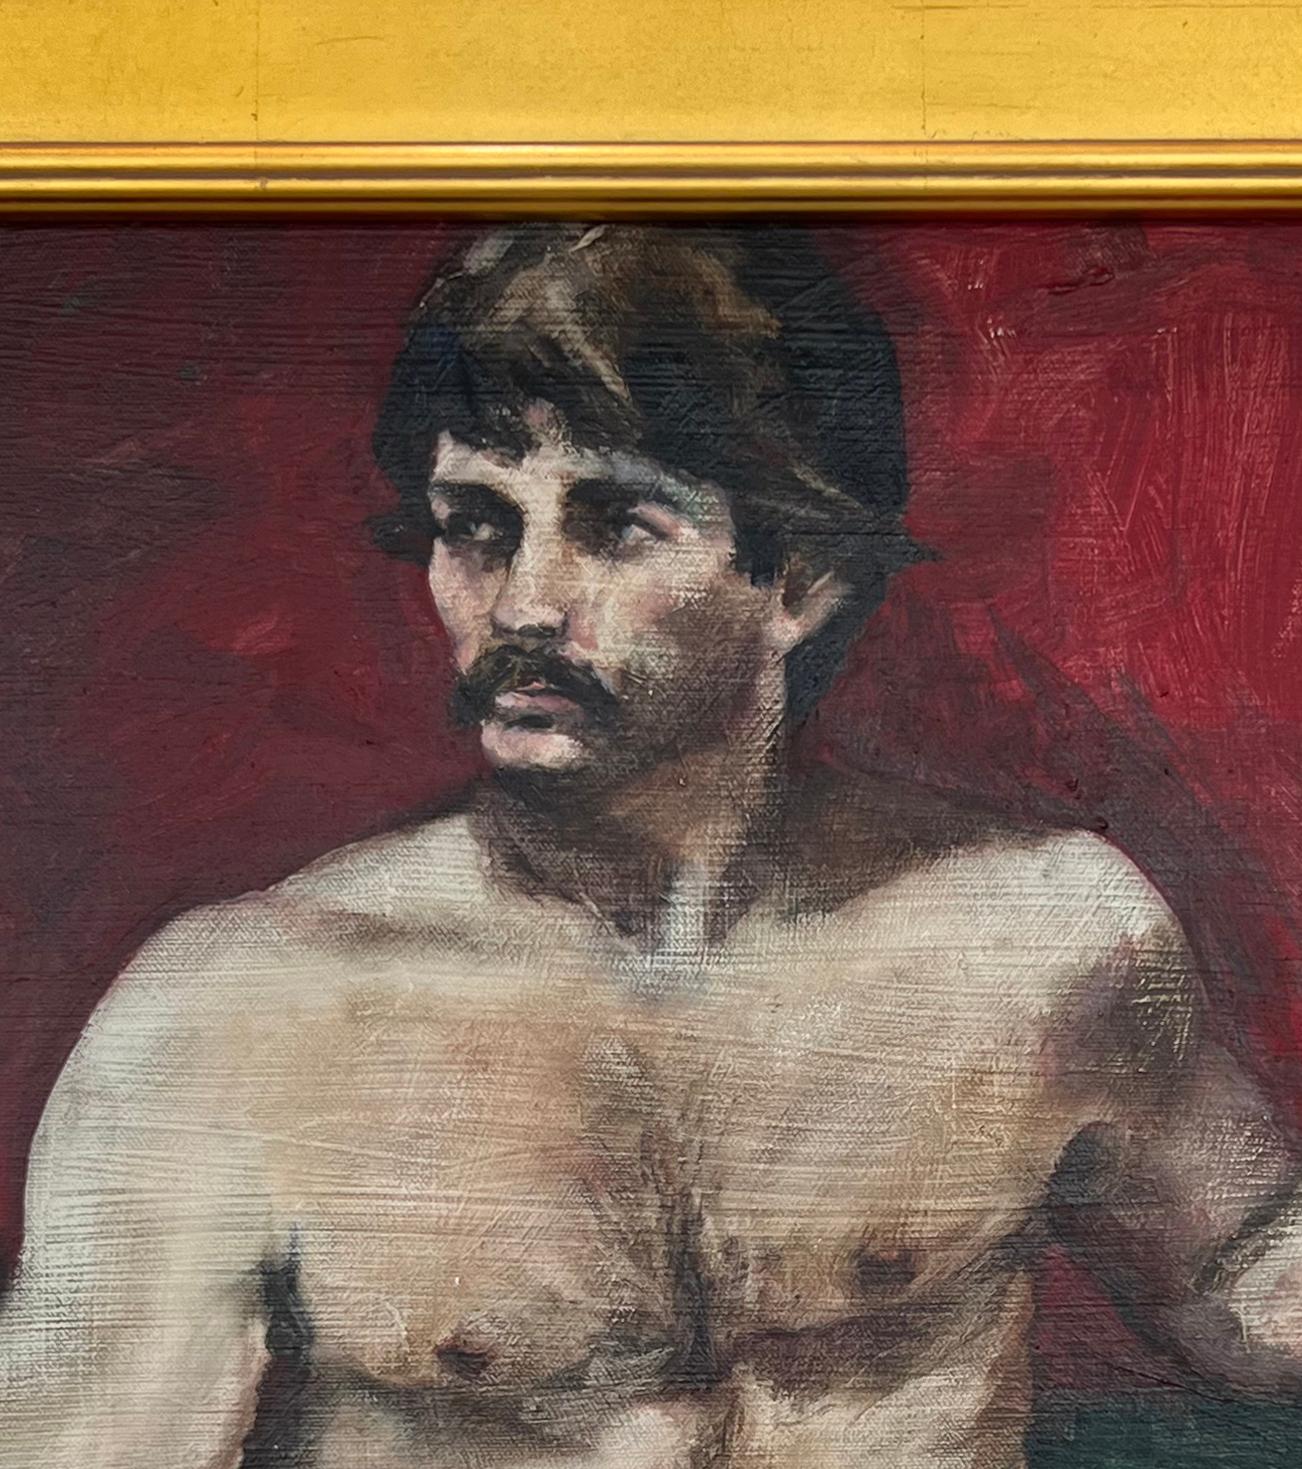 Vintage Framed mid-century male nude study oil painting

Offered for sale is an original mid-century oil painting on canvas of a male nude study. The painting is signed 